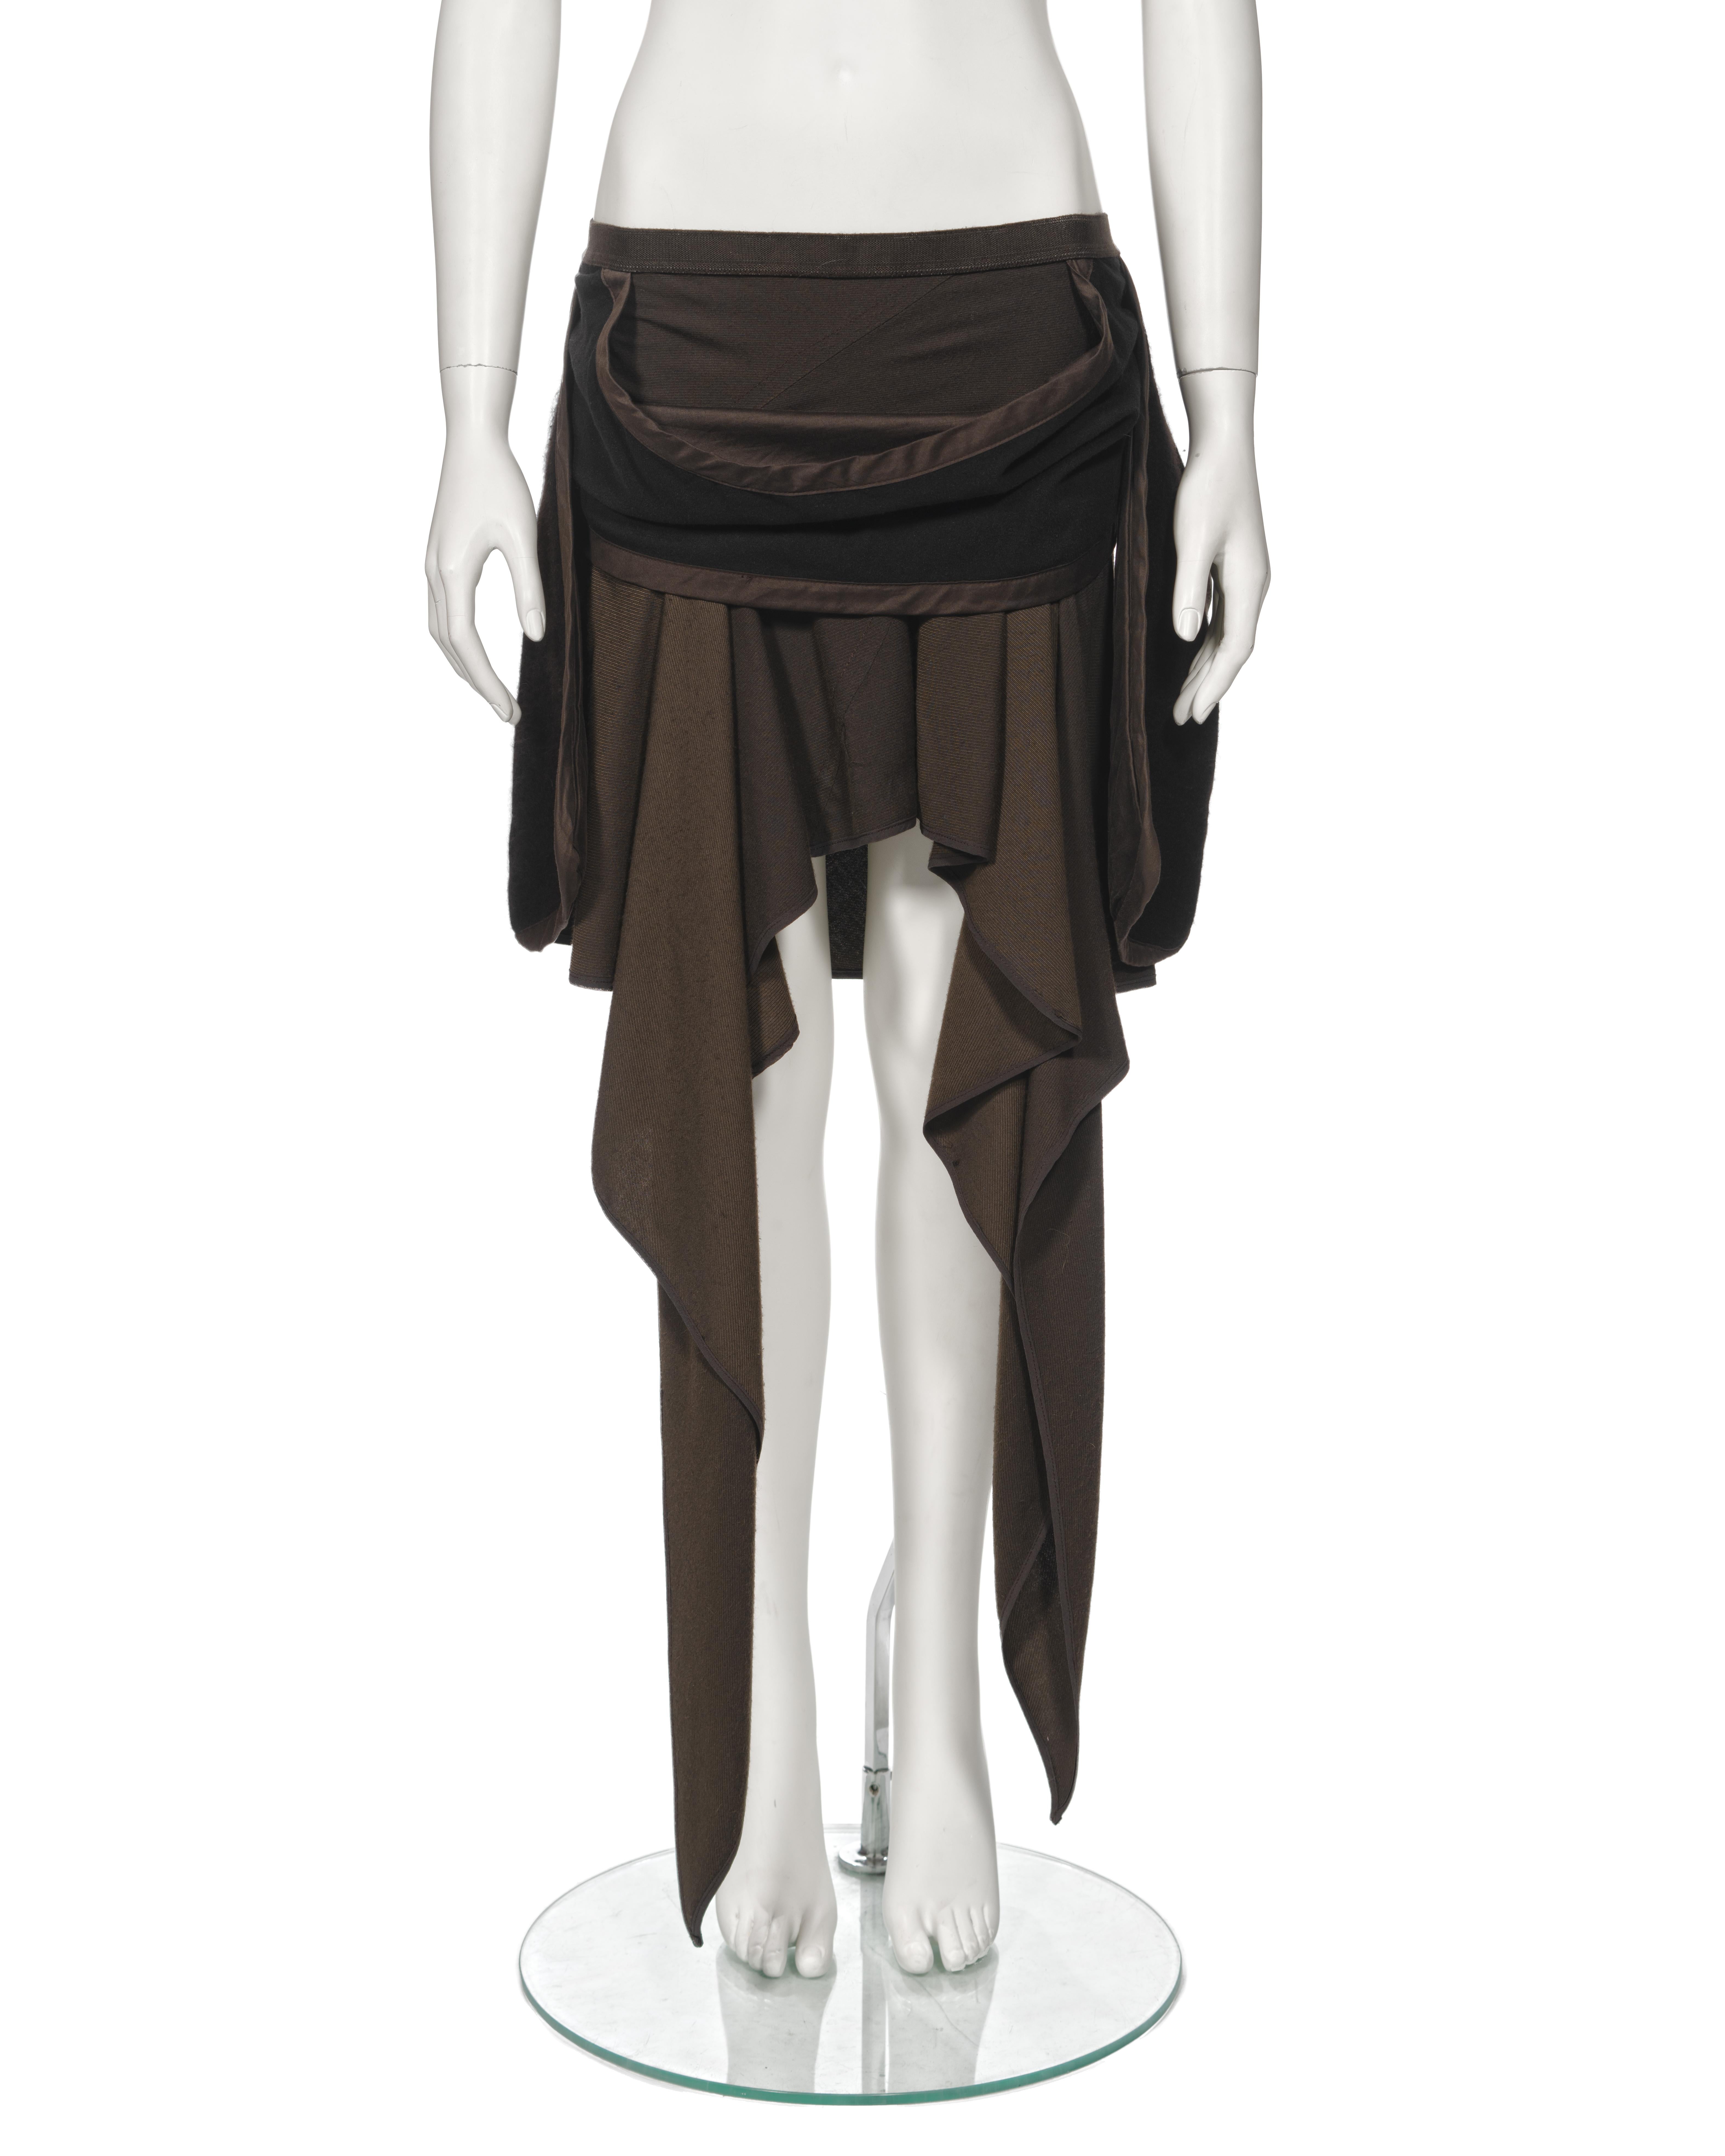 Rick Owens Angora Jacket and Cashmere Skirt 'Queen' Ensemble, fw 2004 For Sale 1